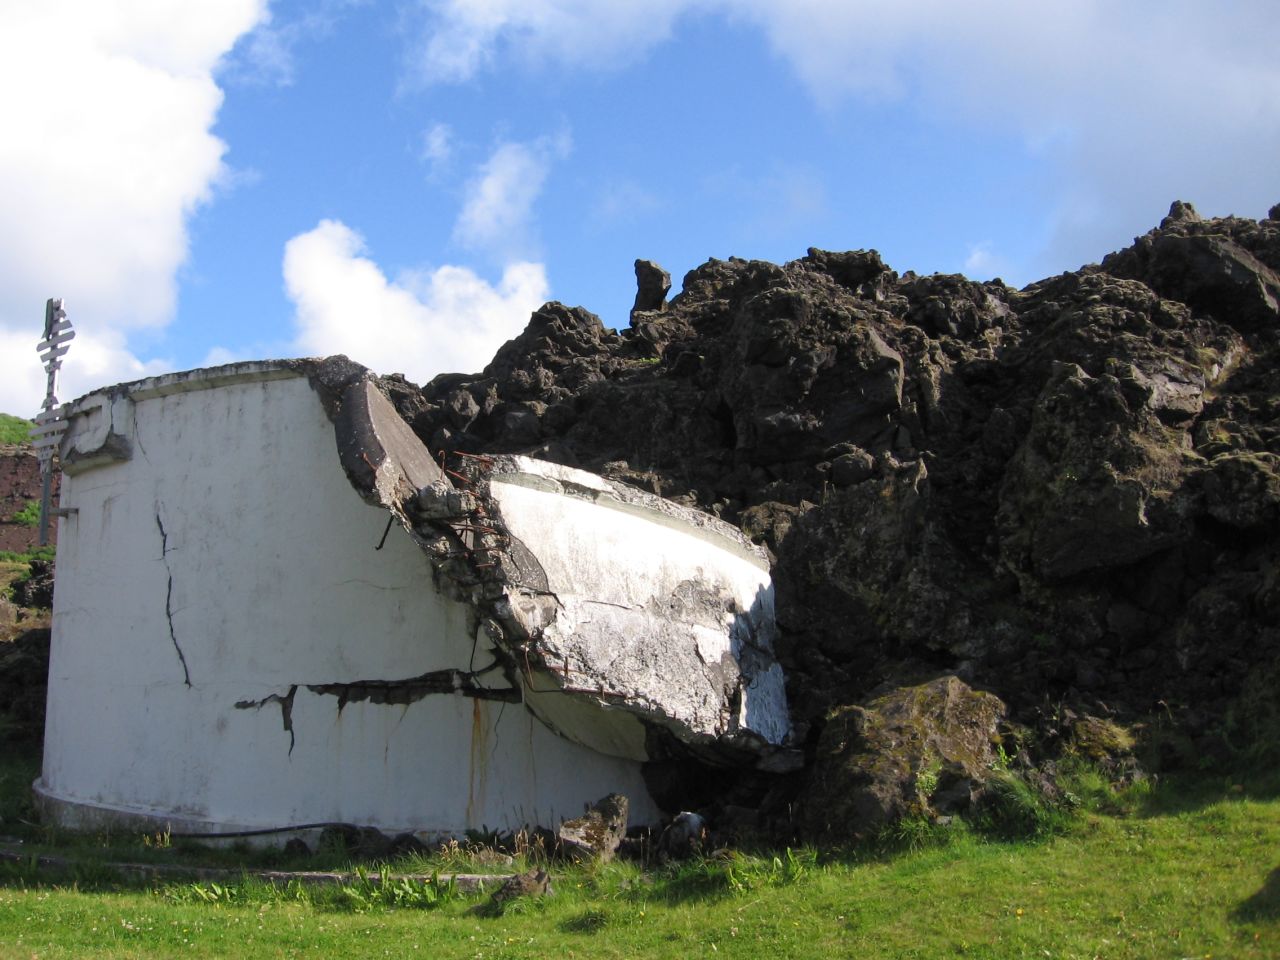 The town of Vestmannaeyjar was saved from Eldfell's lava by using seawater to stop the flow, but not all structures survived.